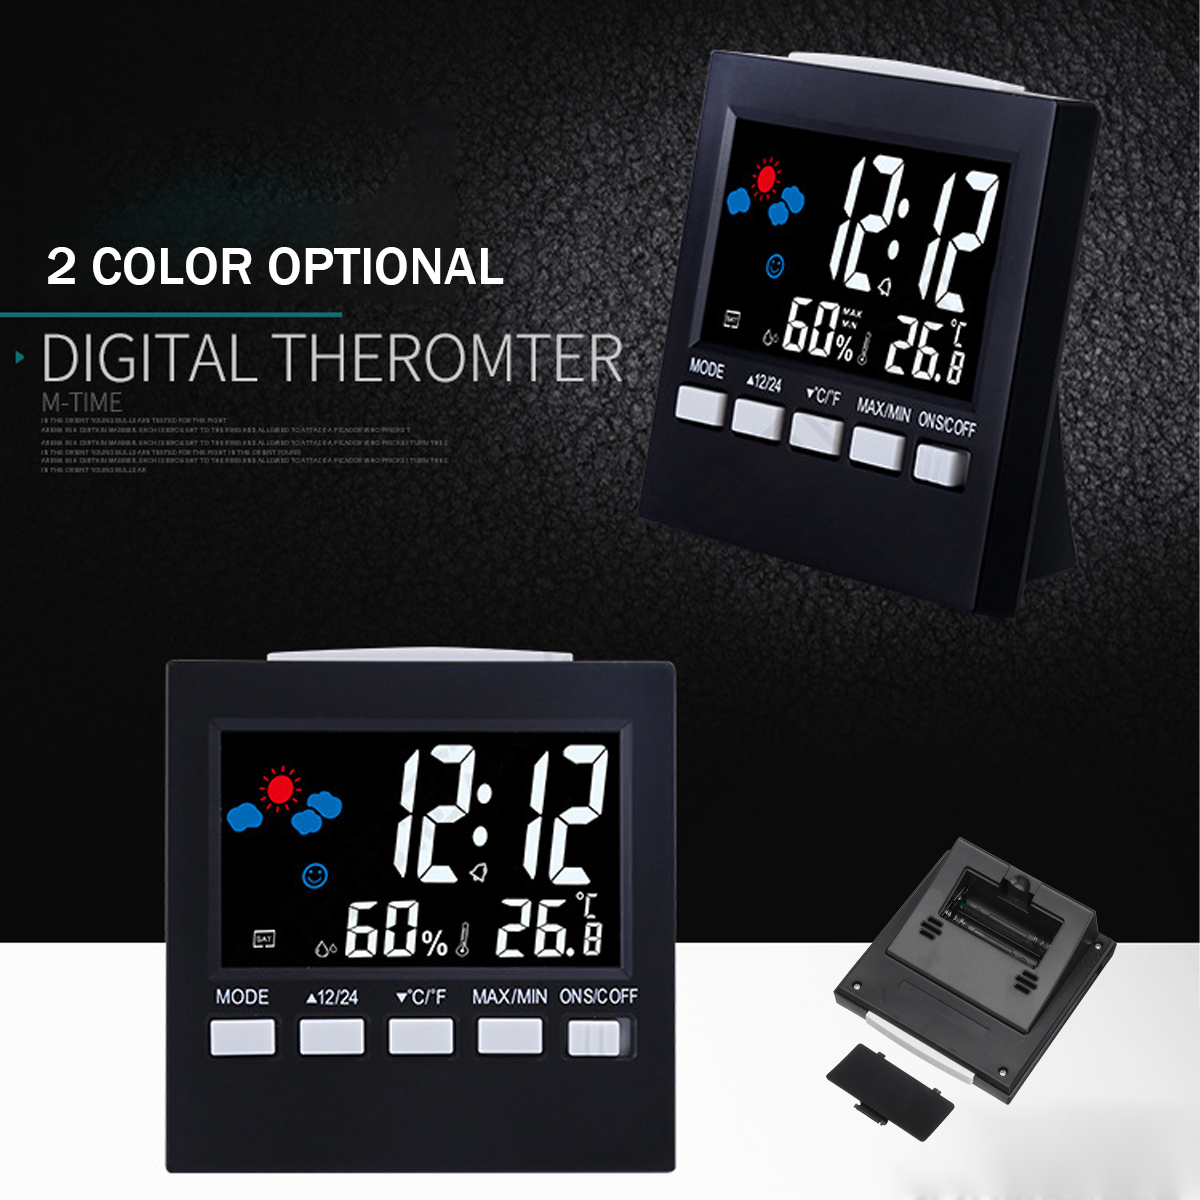 LED-Digital-Alarm-Clock-Temperature-Humidity-Weather-Color-Display-With-Backlit-1671428-5